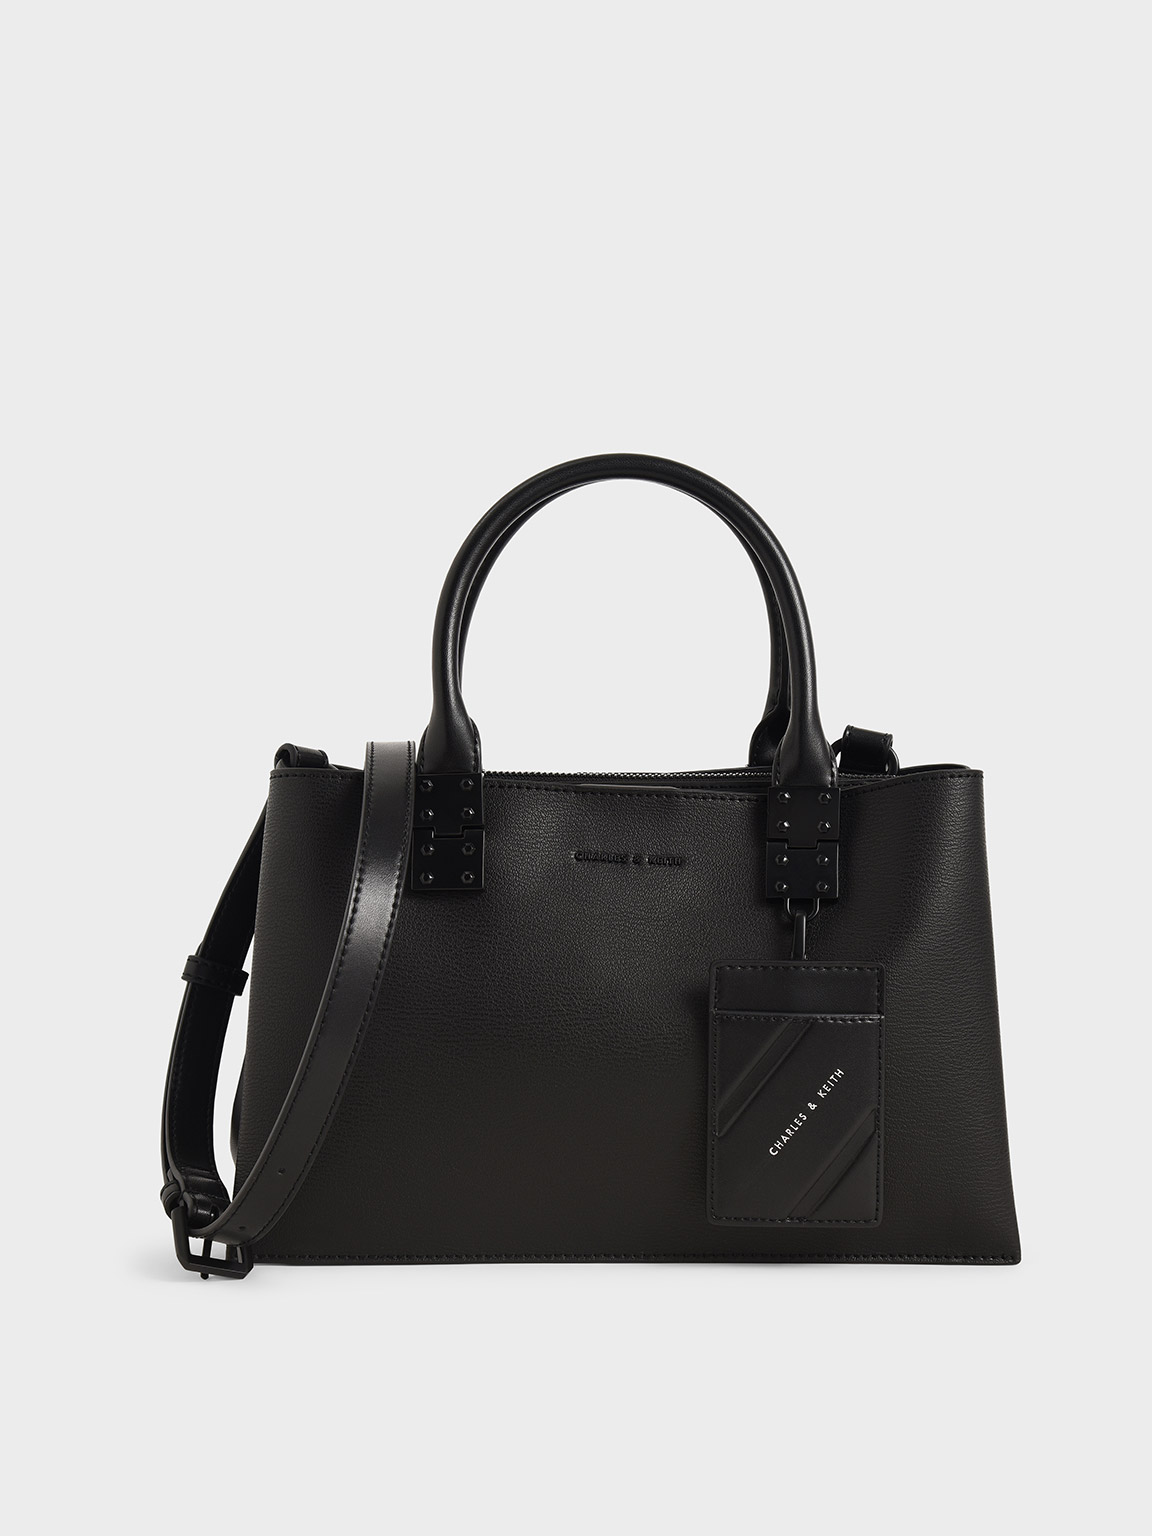 Ultra Matte Black Double Top Handle Structured Bag | CHARLES & KEITH